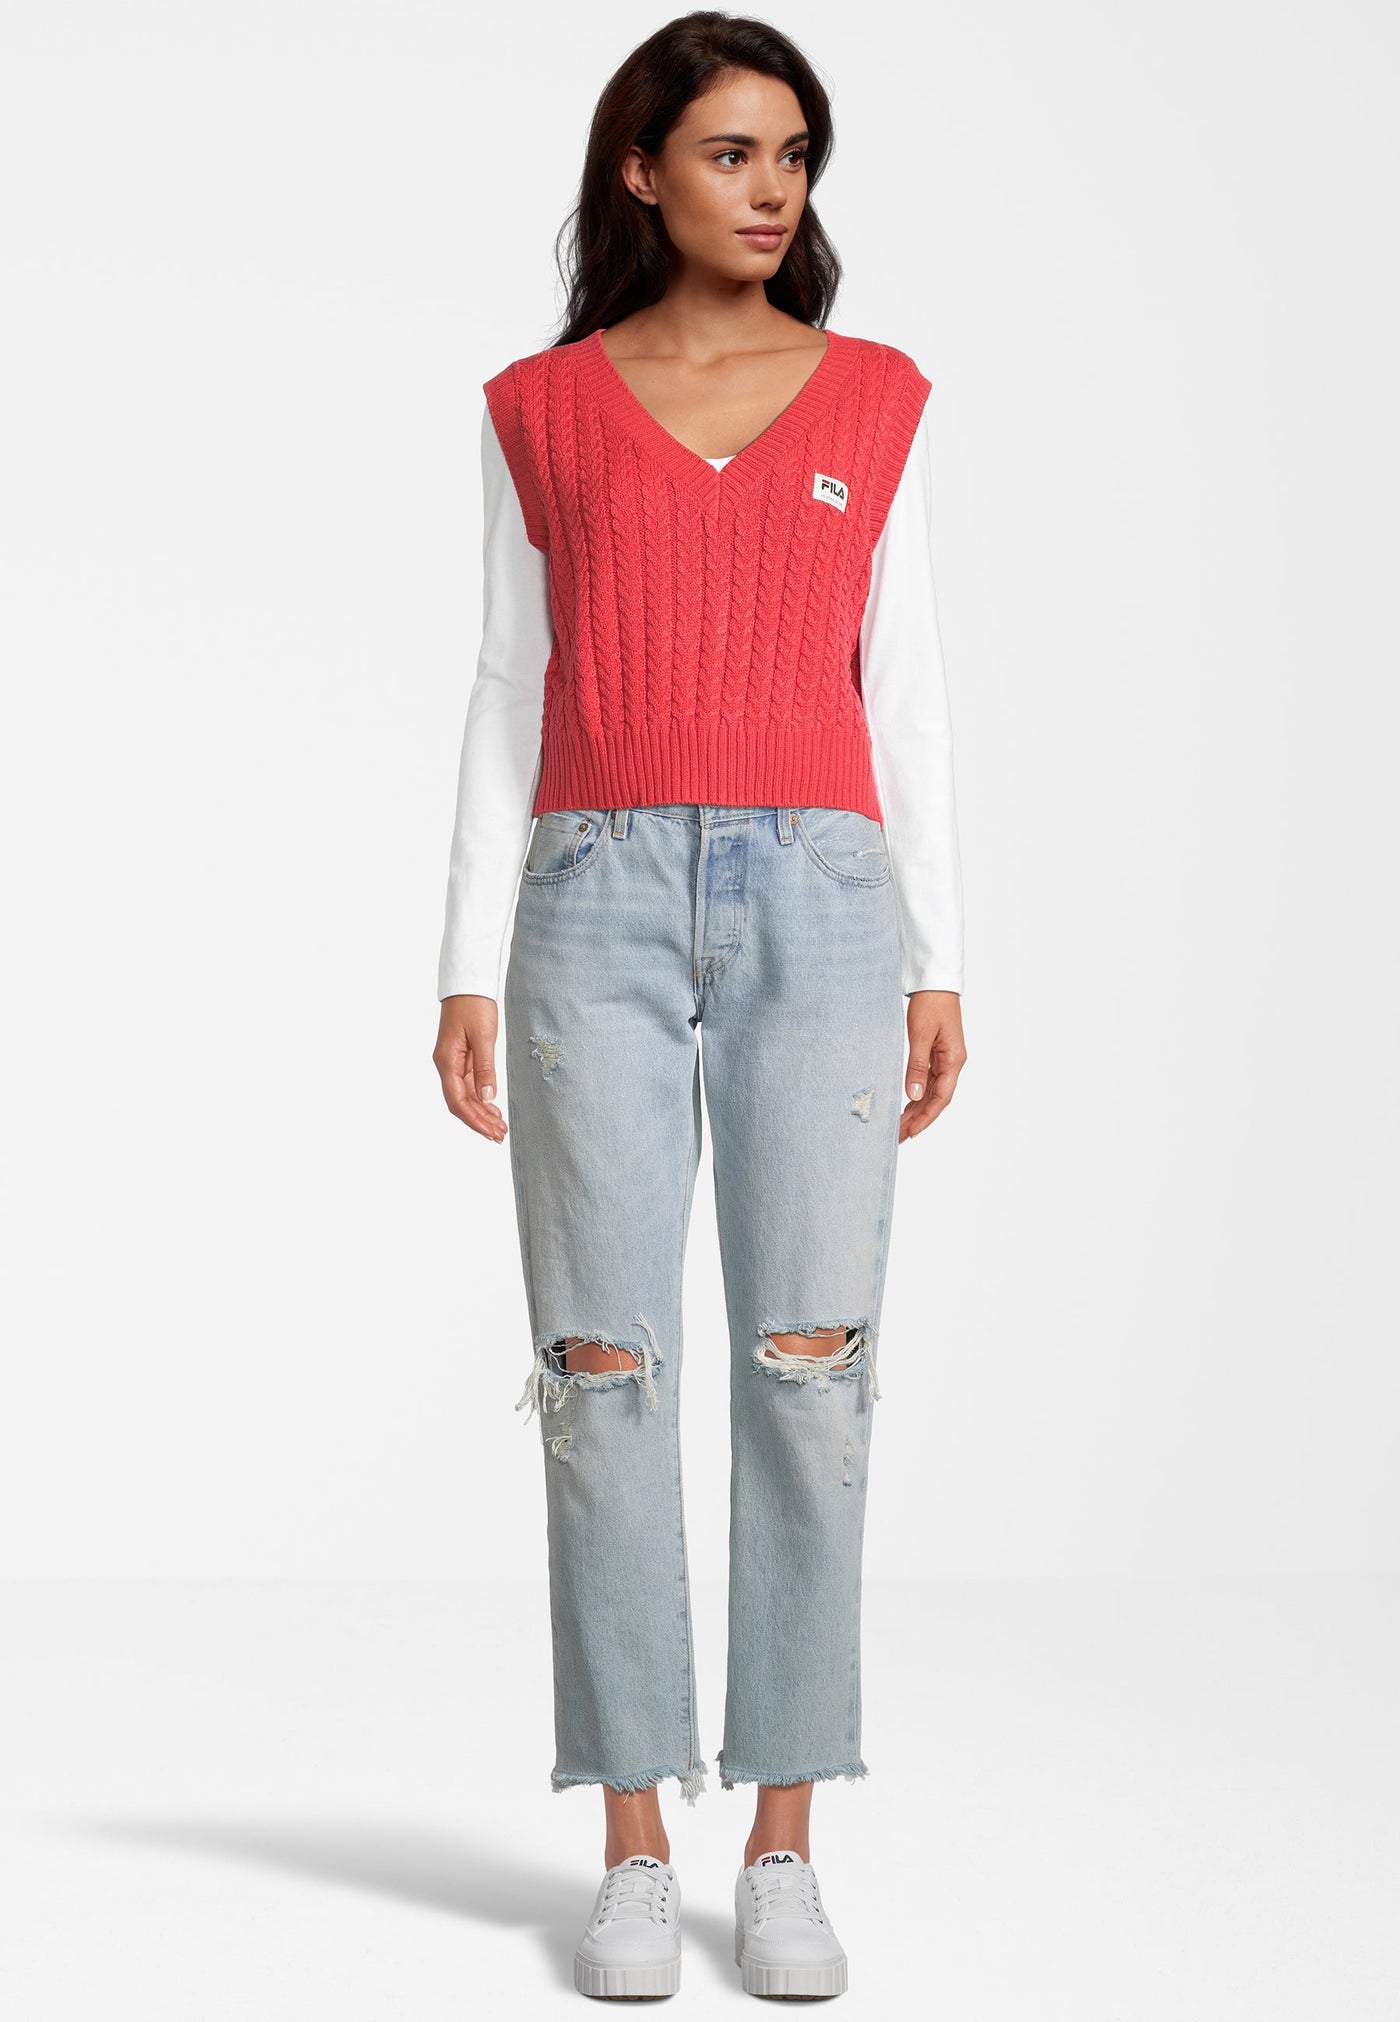 Tarragona Knitted Cropped Vest in Teaberry Pullunder Fila   